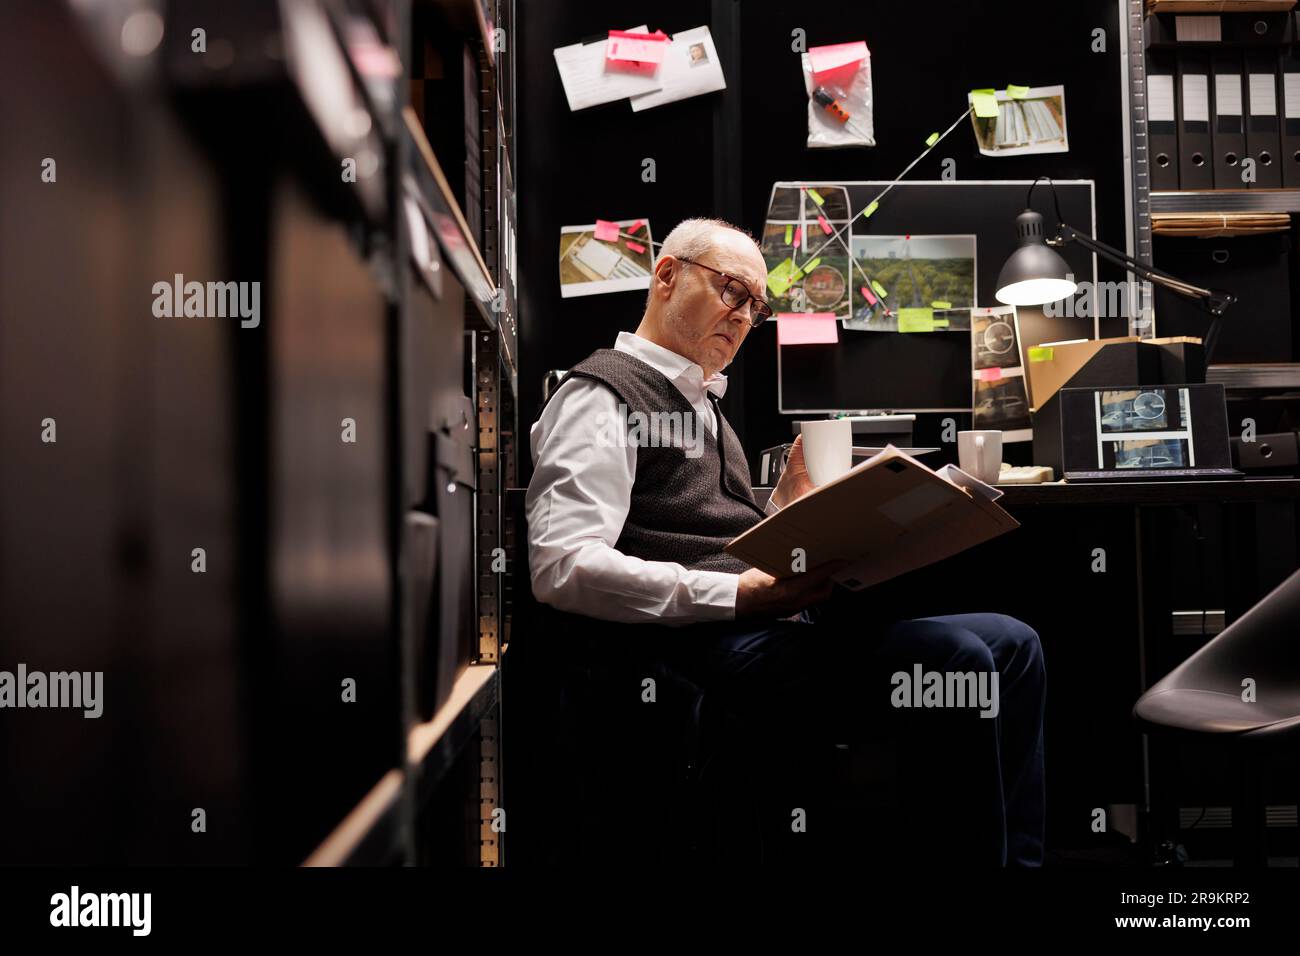 Old investigator working overhours at missing person case, analyzing crime scene evidence. Elderly police officer sitting at desk reading confidential victim report files in arhive room Stock Photo